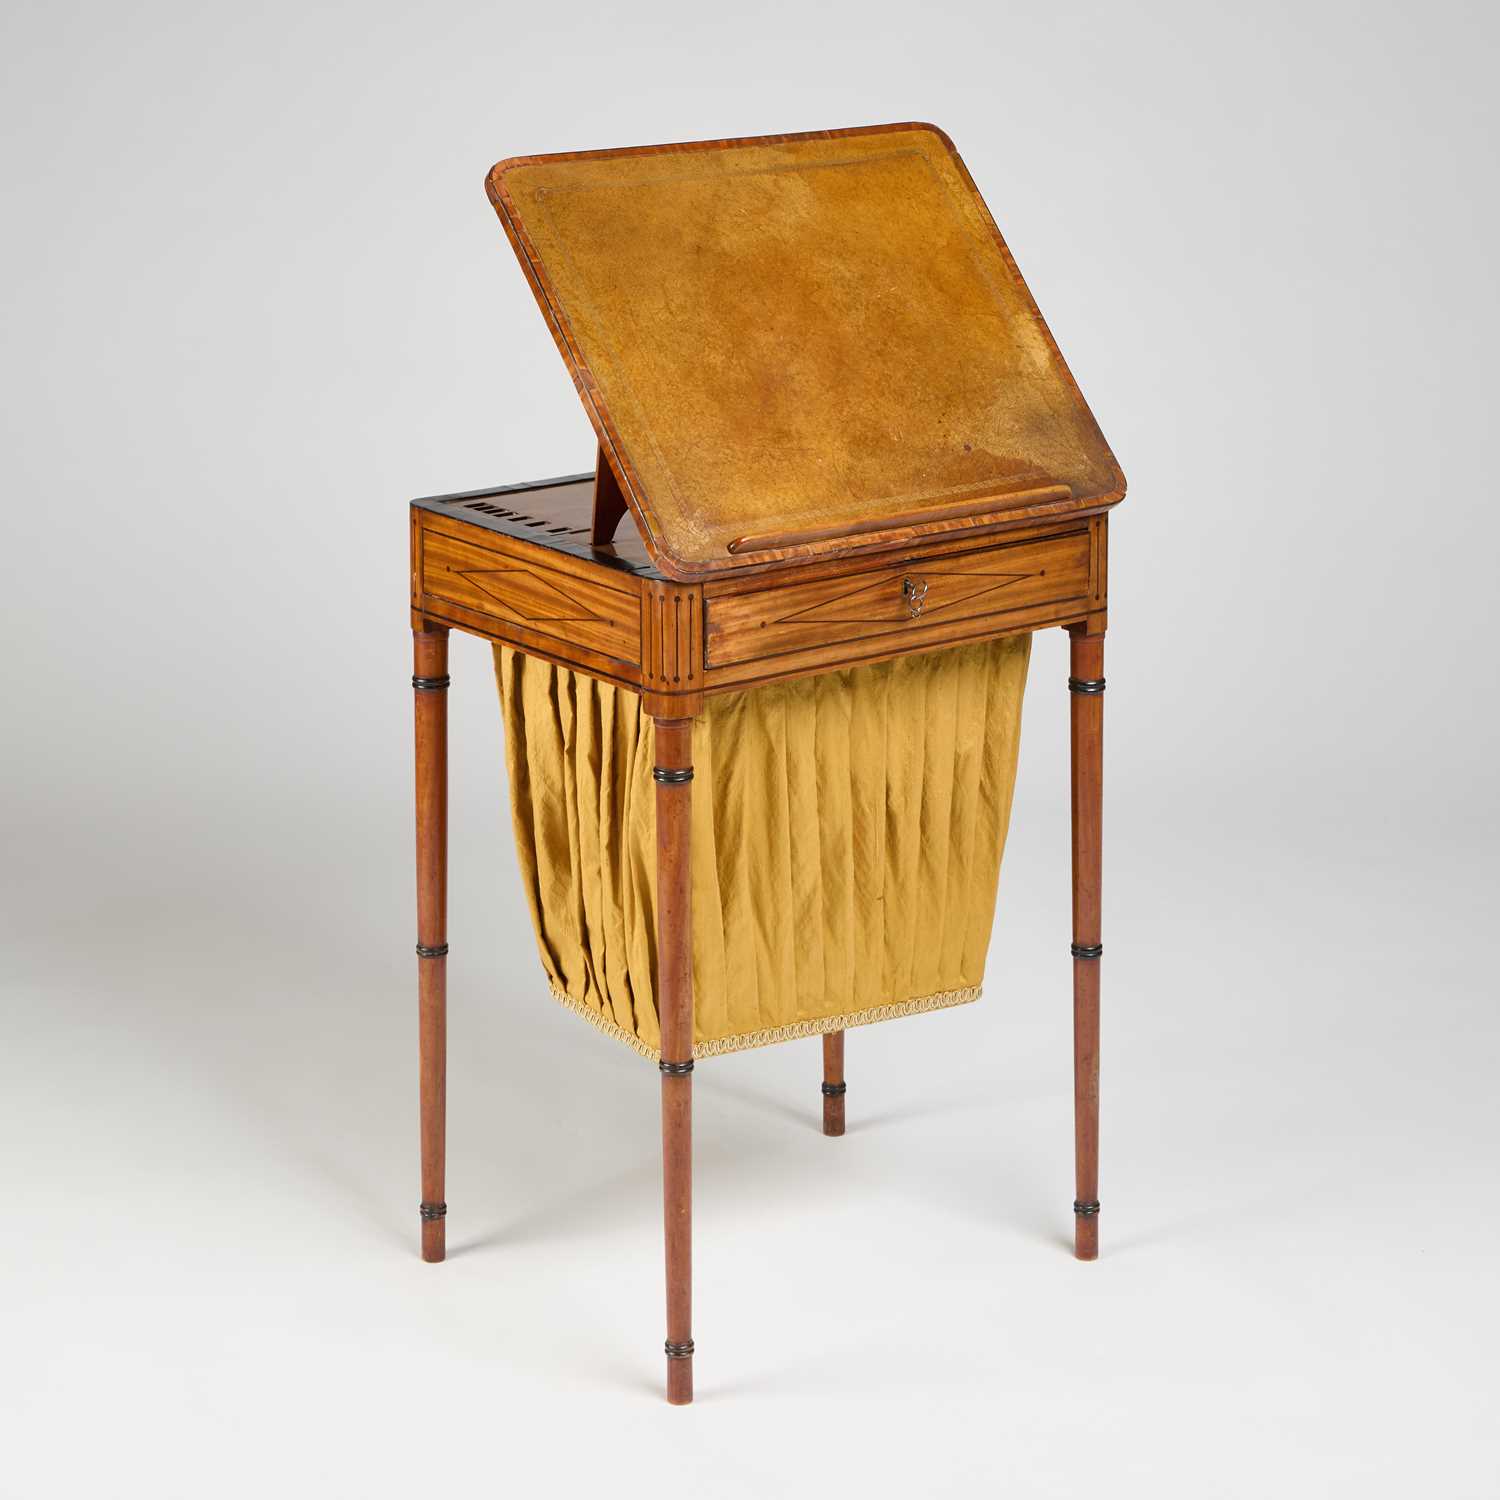 A REGENCY LEATHER-INSET SATINWOOD LADIES WRITING TABLE - Image 2 of 2